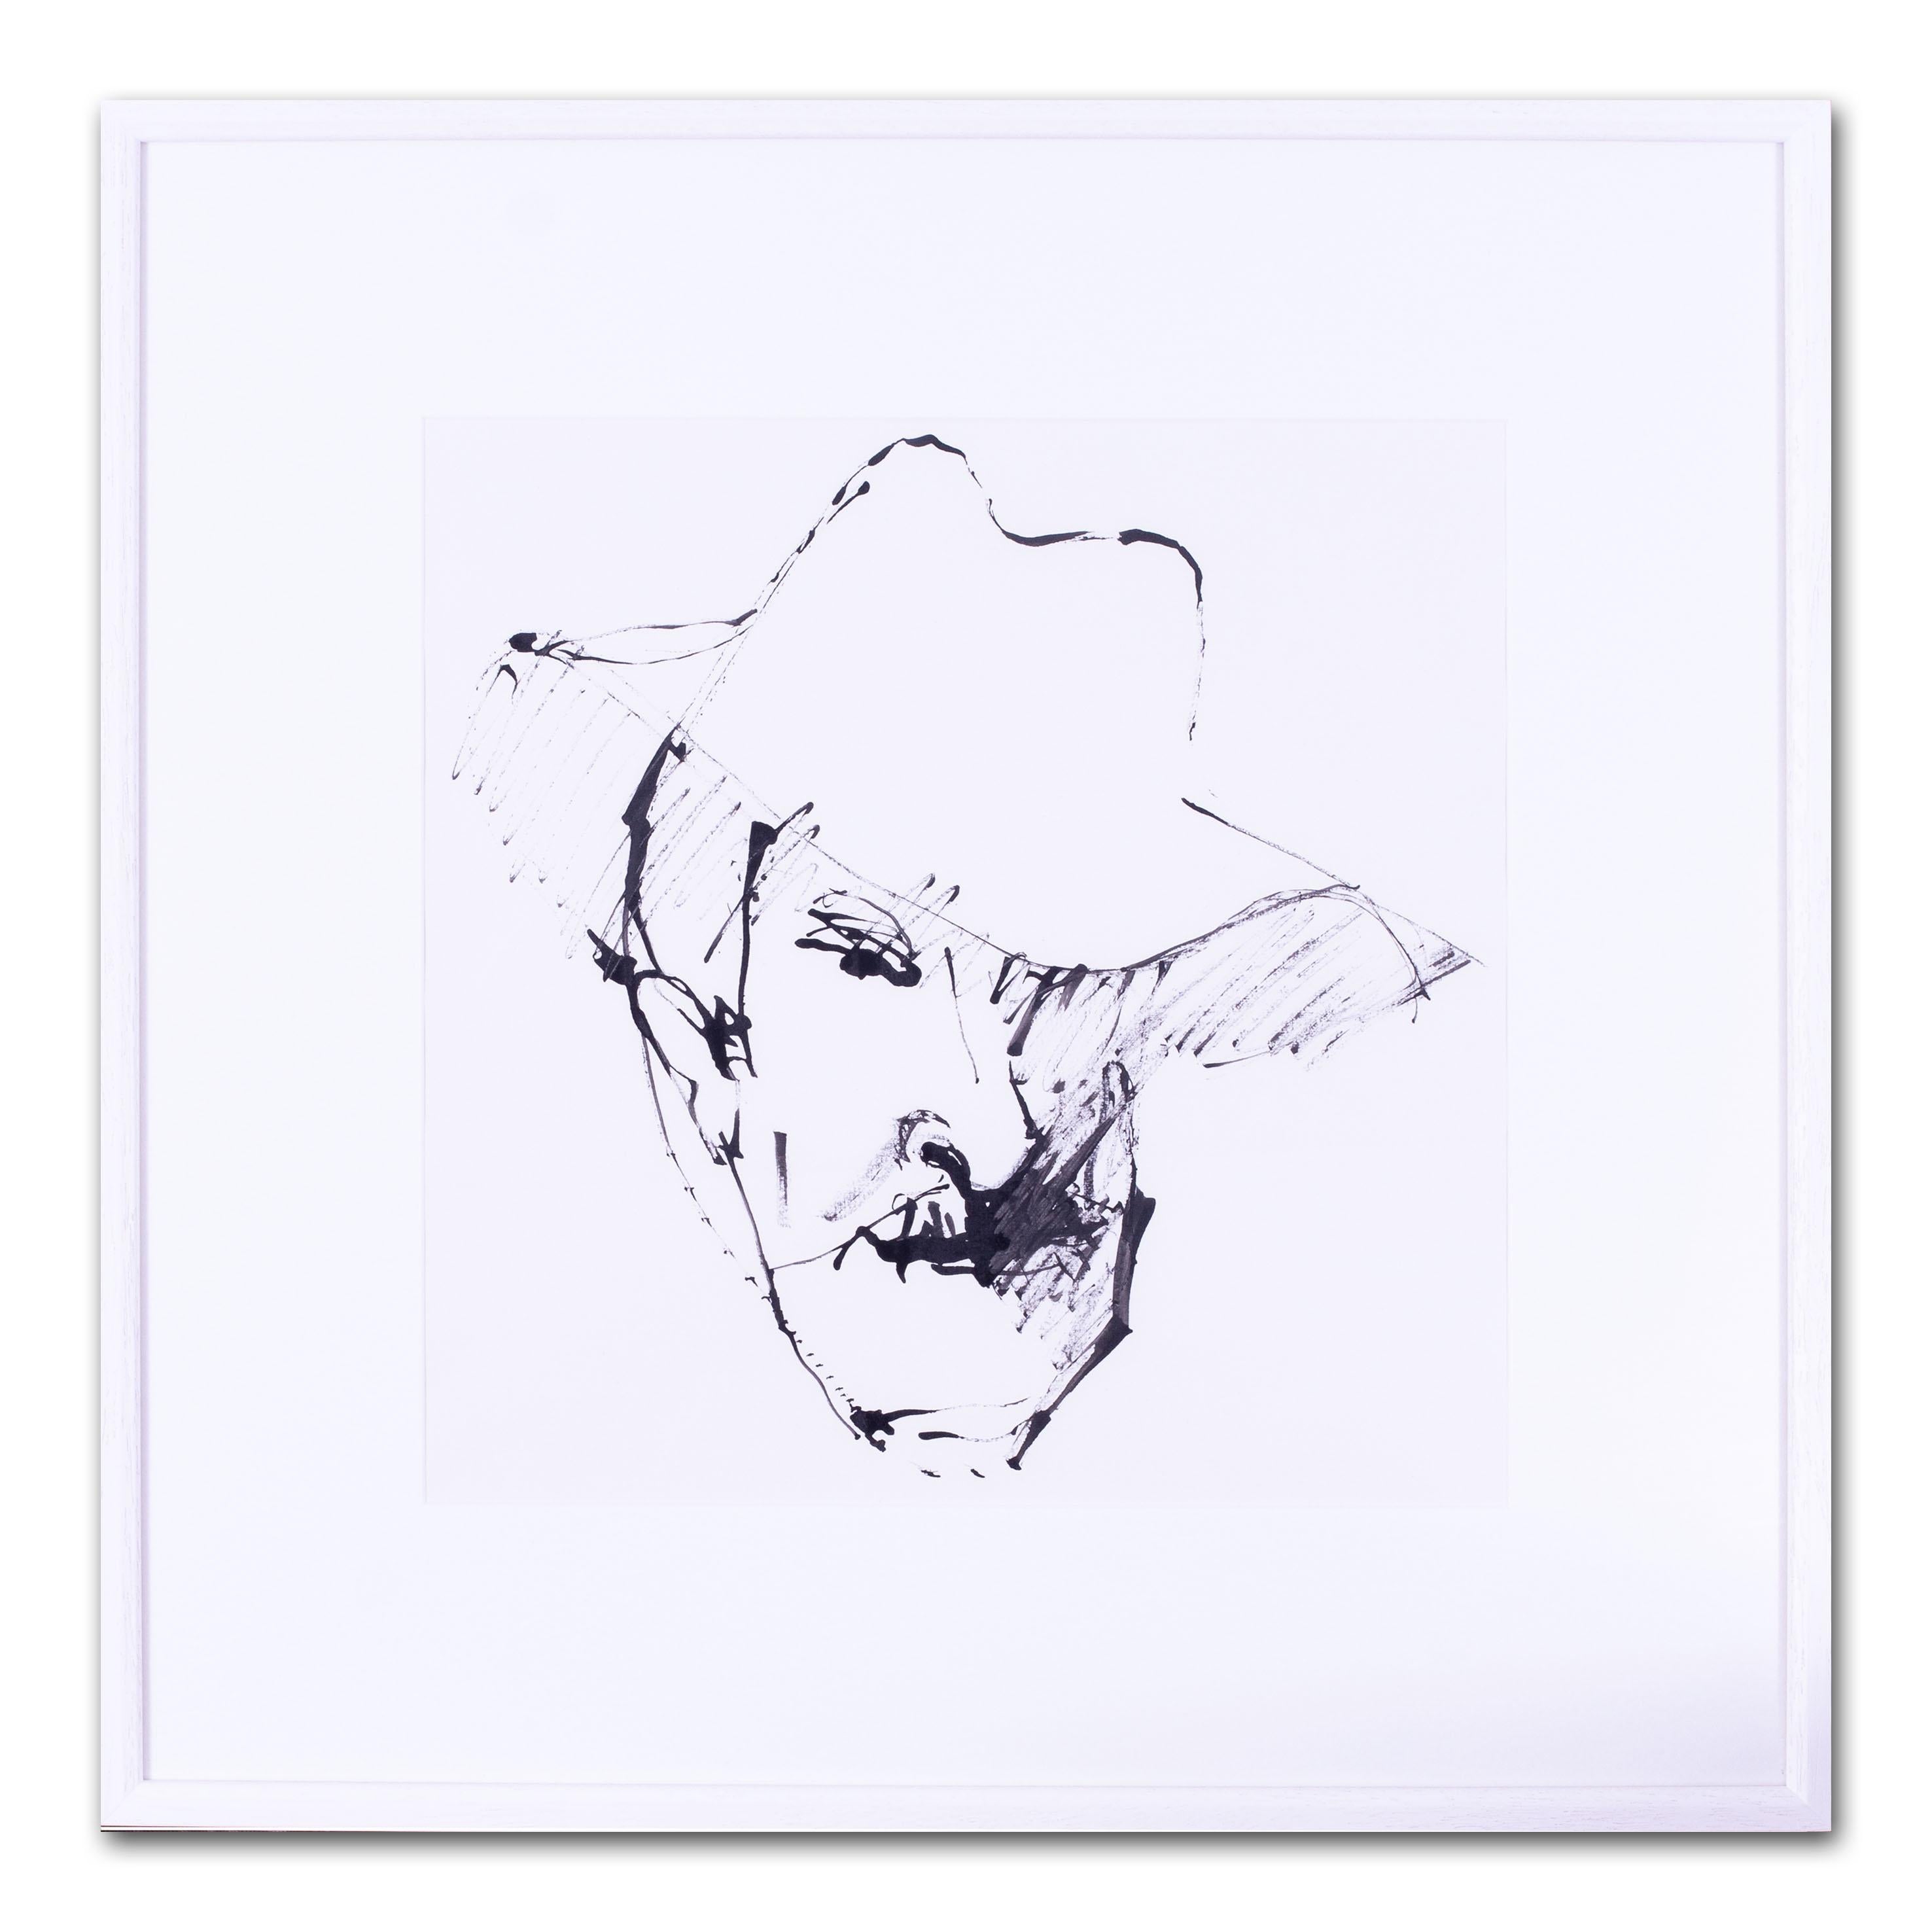 British 20th Century St. Ives artist, Sven Berlin, Self Portrait, pen and ink For Sale 1